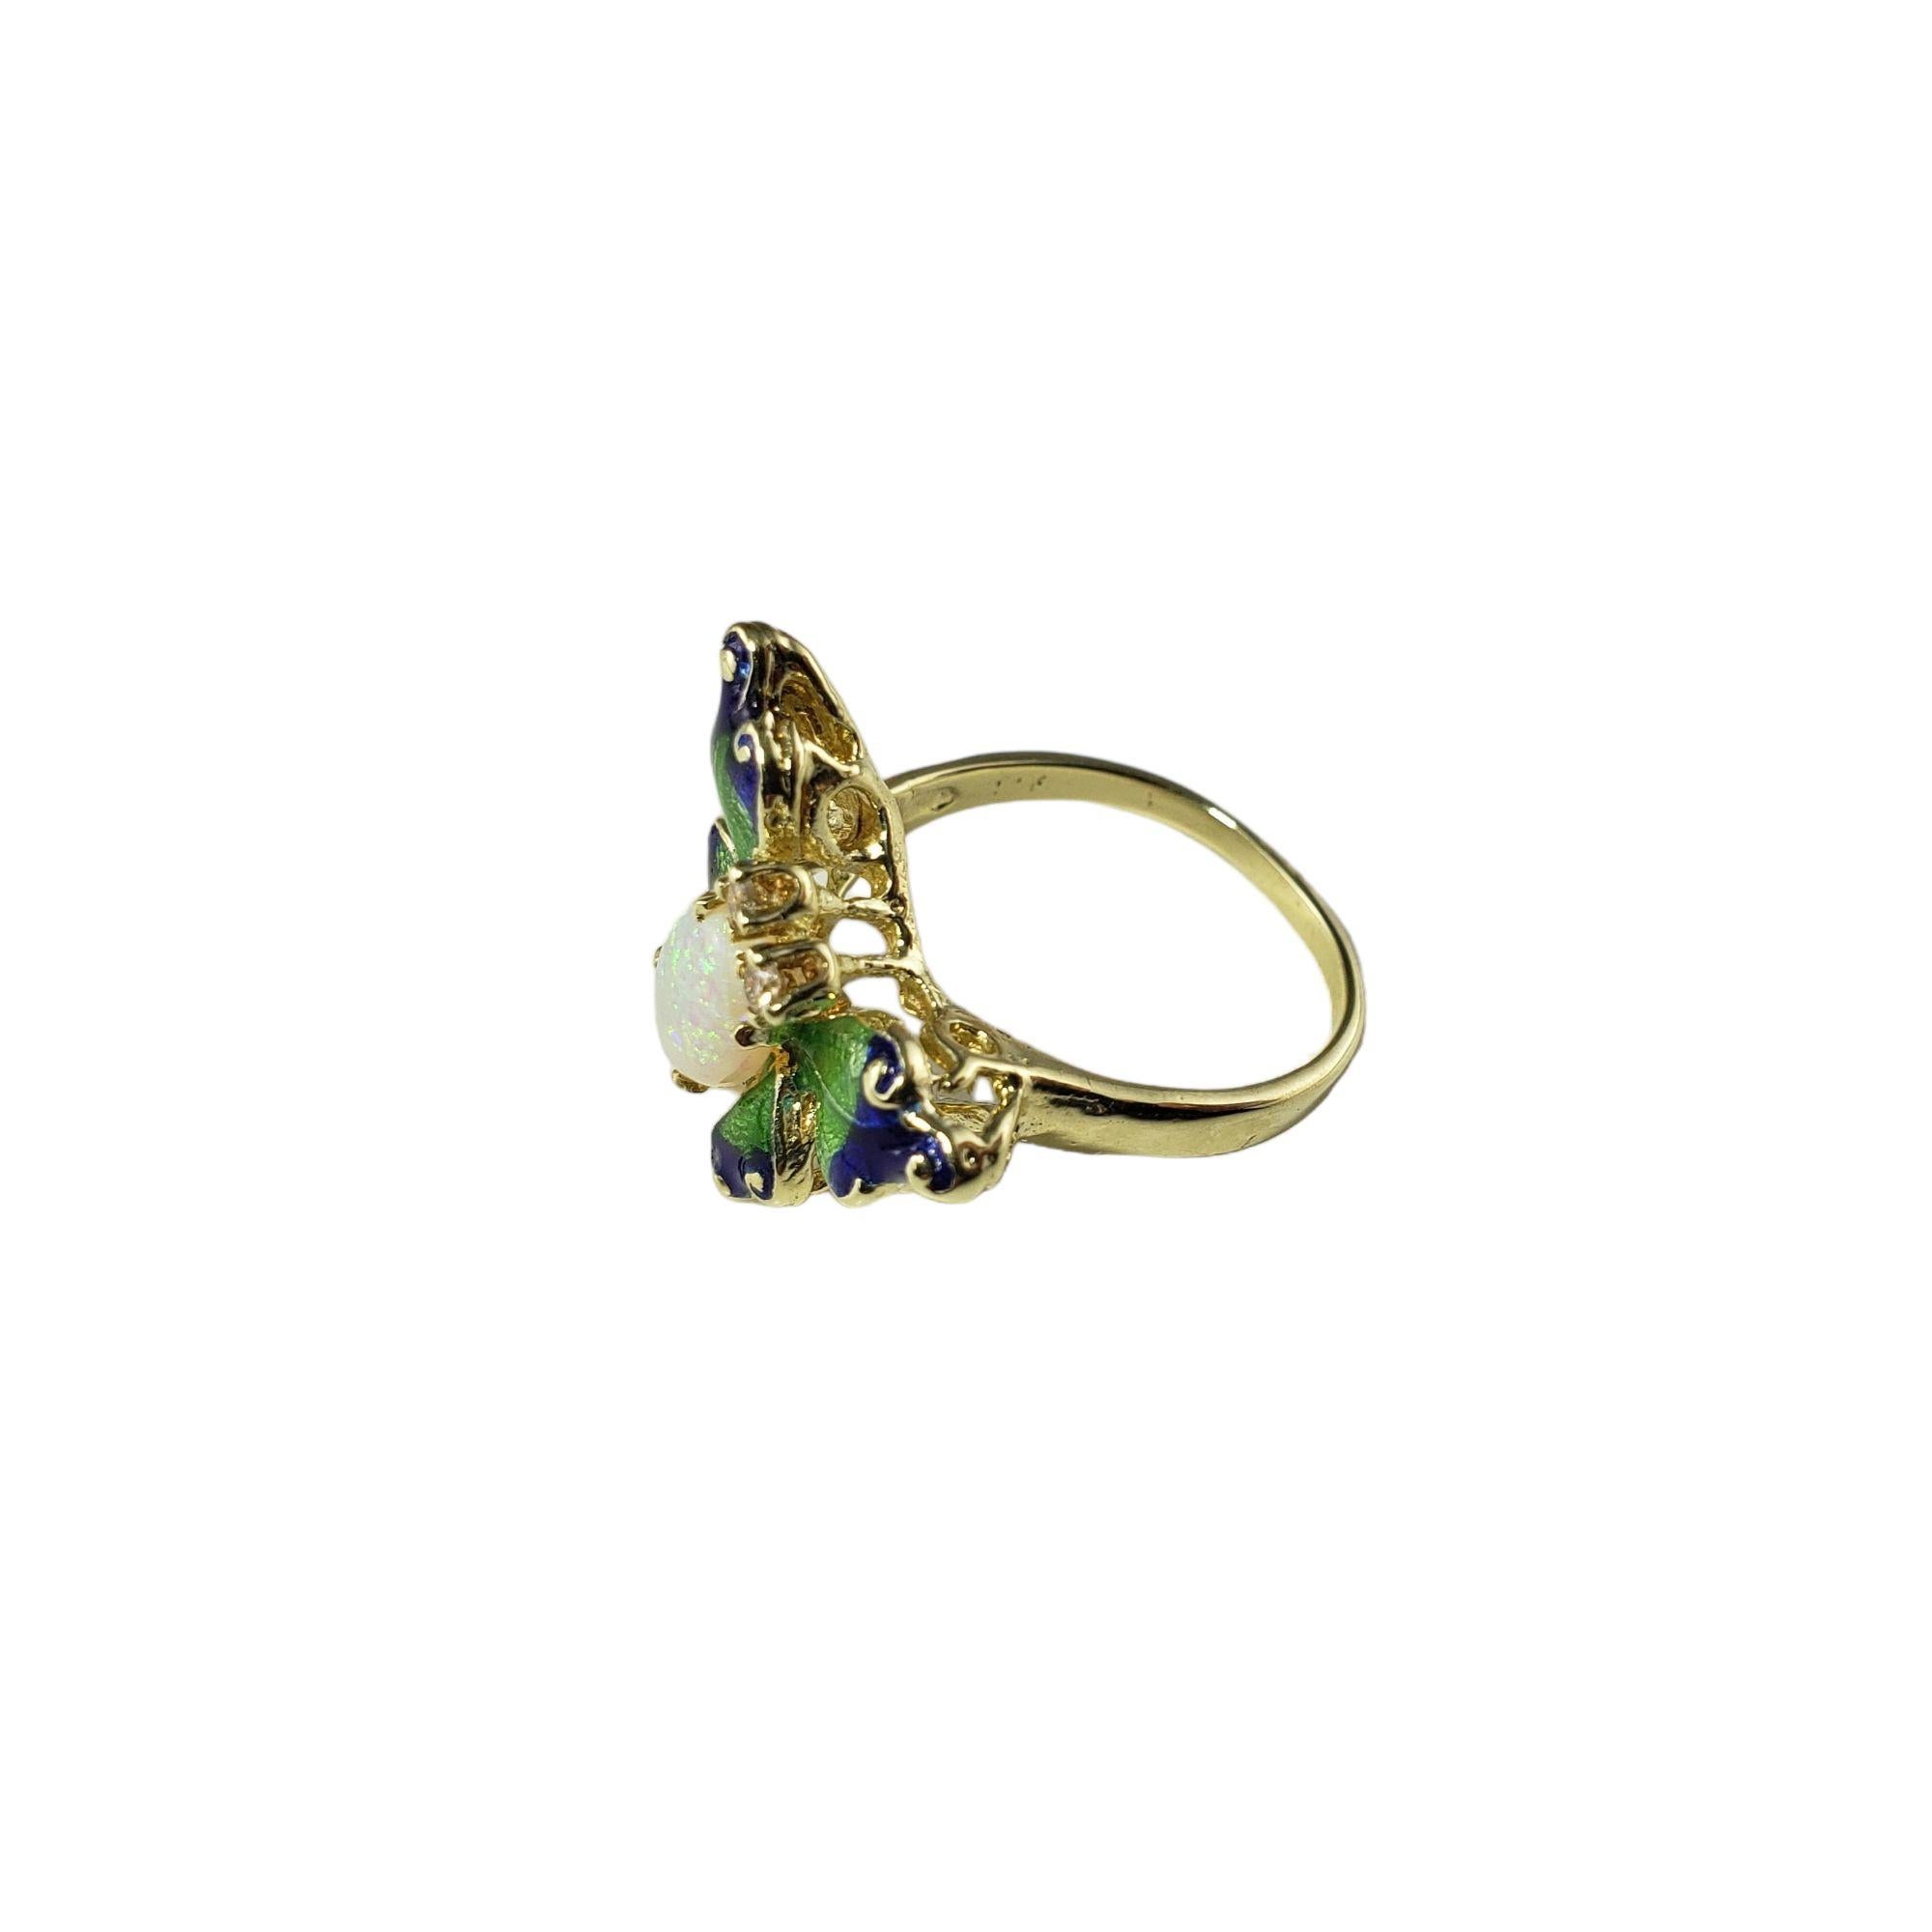 Vintage 14 Karat Yellow Gold Opal and Diamond Butterfly Ring Size 7.25-

This lovely butterfly ring features one oval opal (9 mm x 6 mm) and two round brilliant cut diamonds set in beautifully detailed 14K yellow gold. Accented with colorful blue